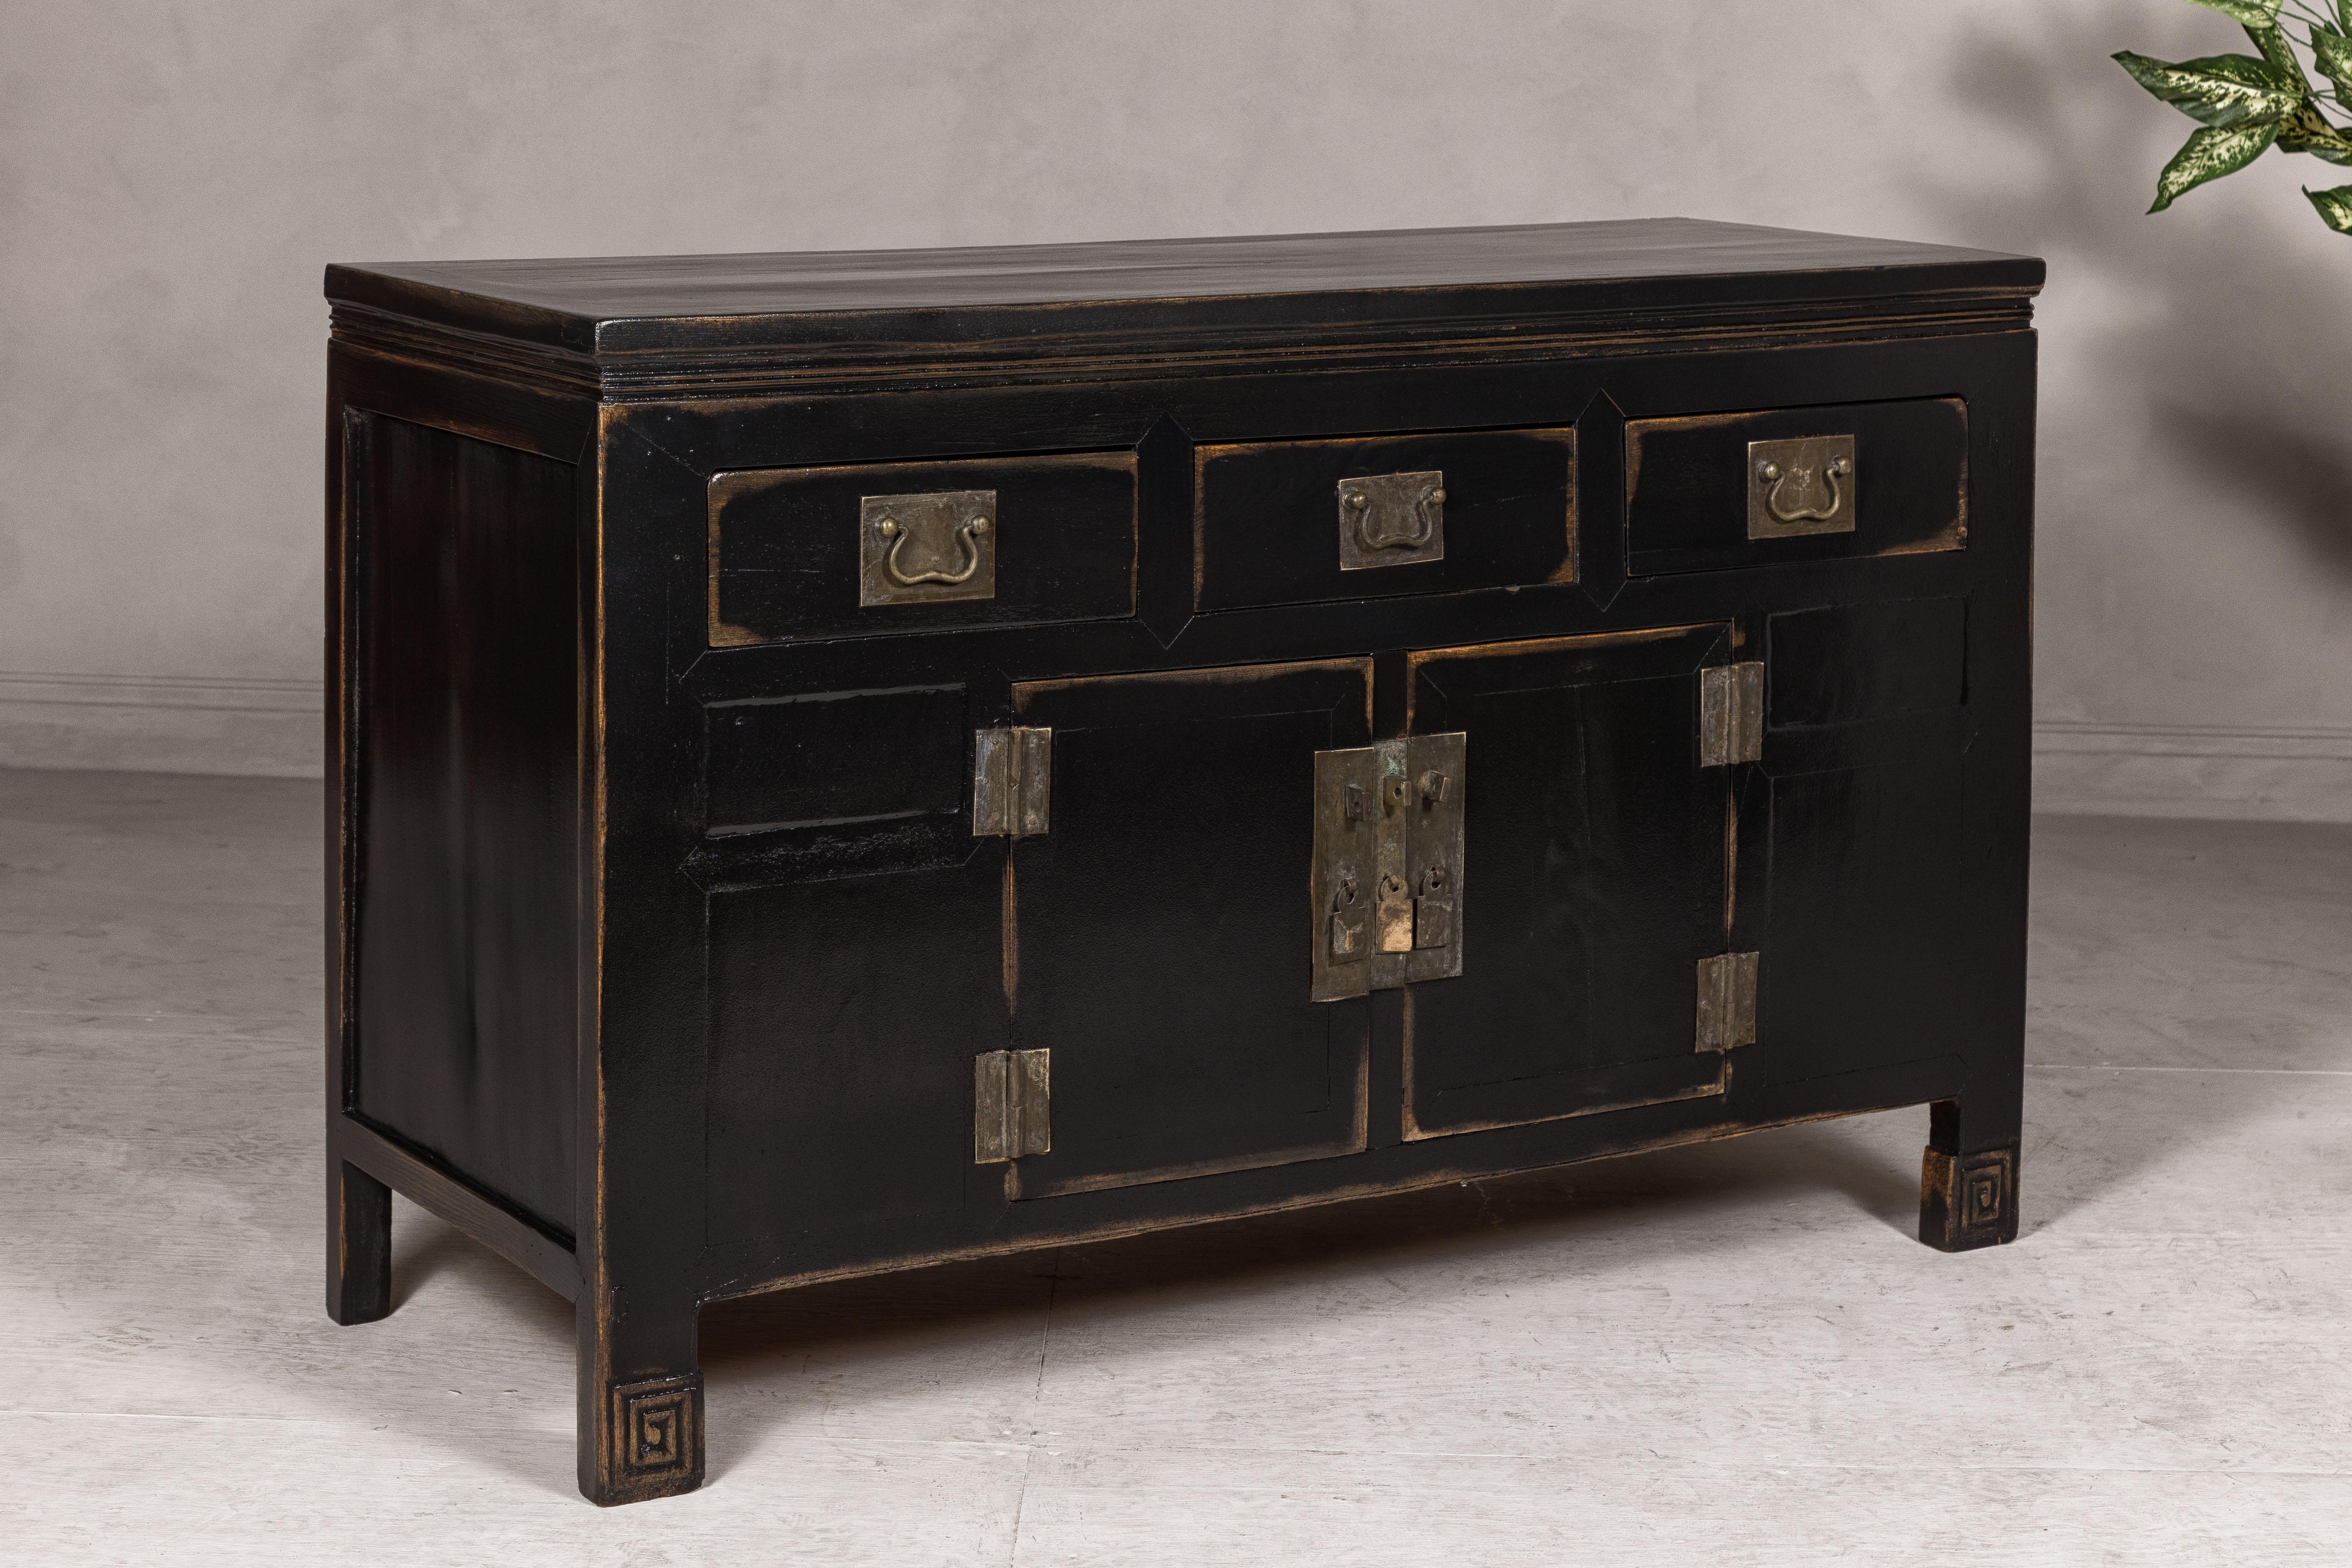 Black Lacquer Sideboard with Rubbed Edges, Brass Hardware, Doors and Drawers For Sale 6